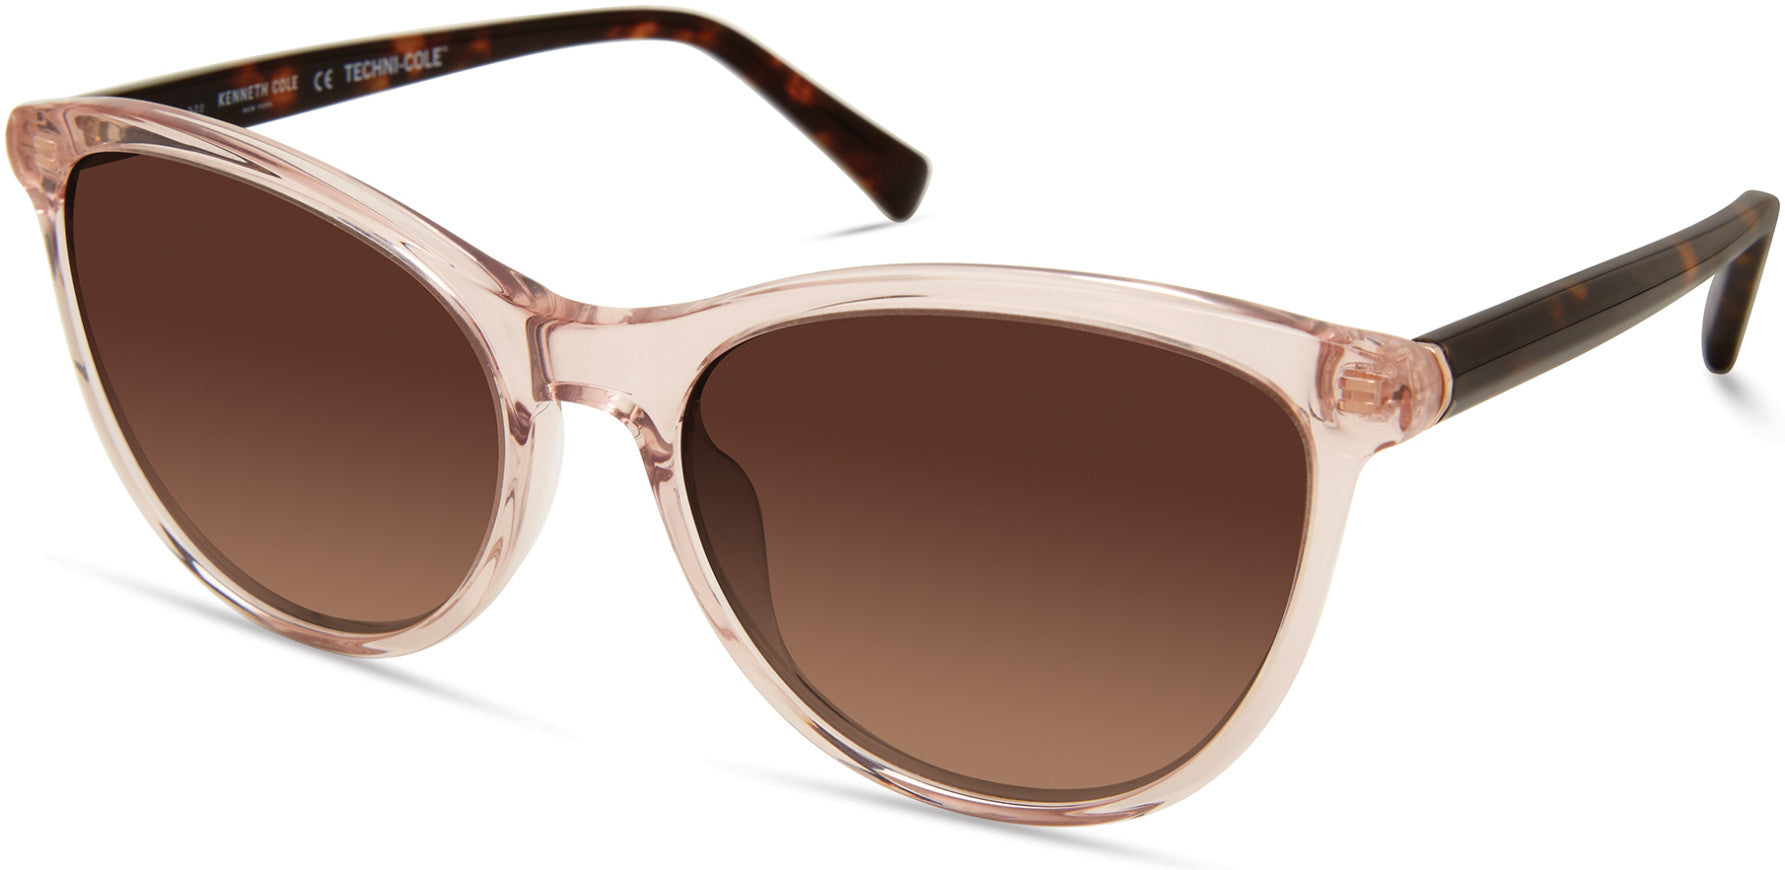 Kenneth Cole New York,Kenneth Cole Reaction KC7255 Round Sunglasses 72H-72H - Shiny Pink / Brown Polarized